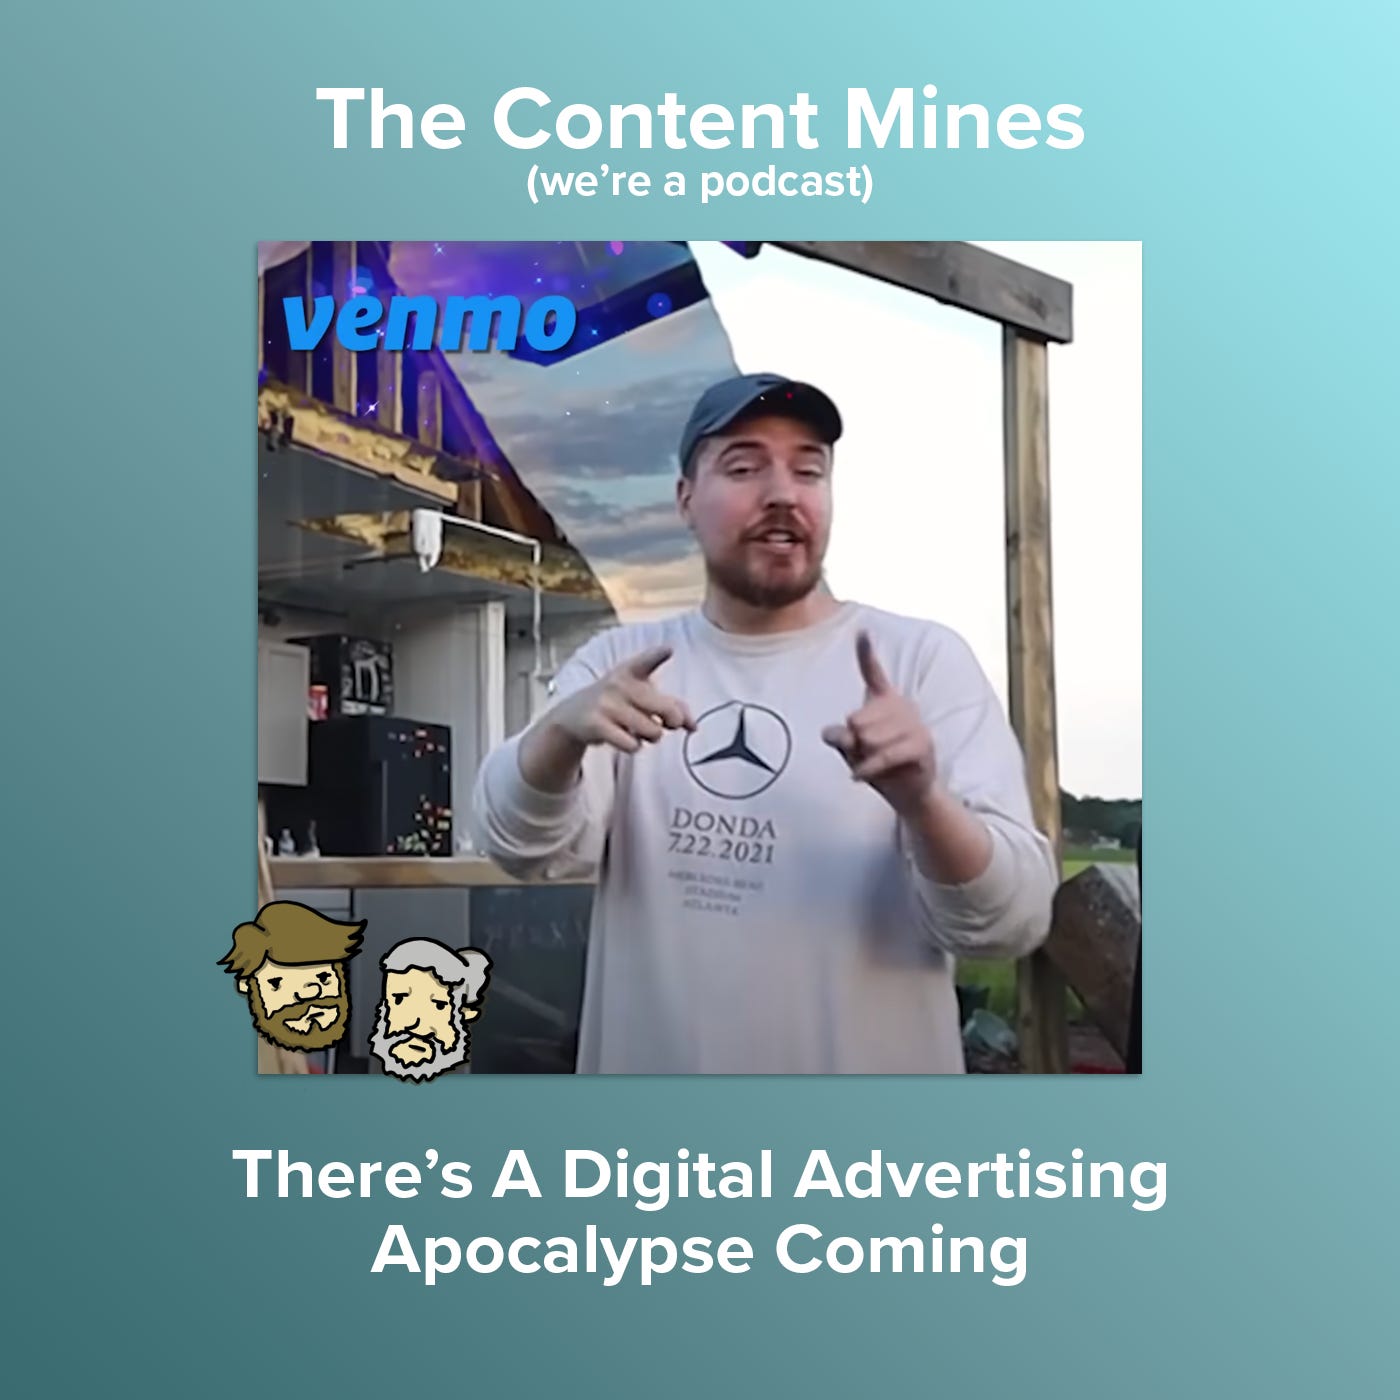 There’s A Digital Advertising Apocalypse Coming